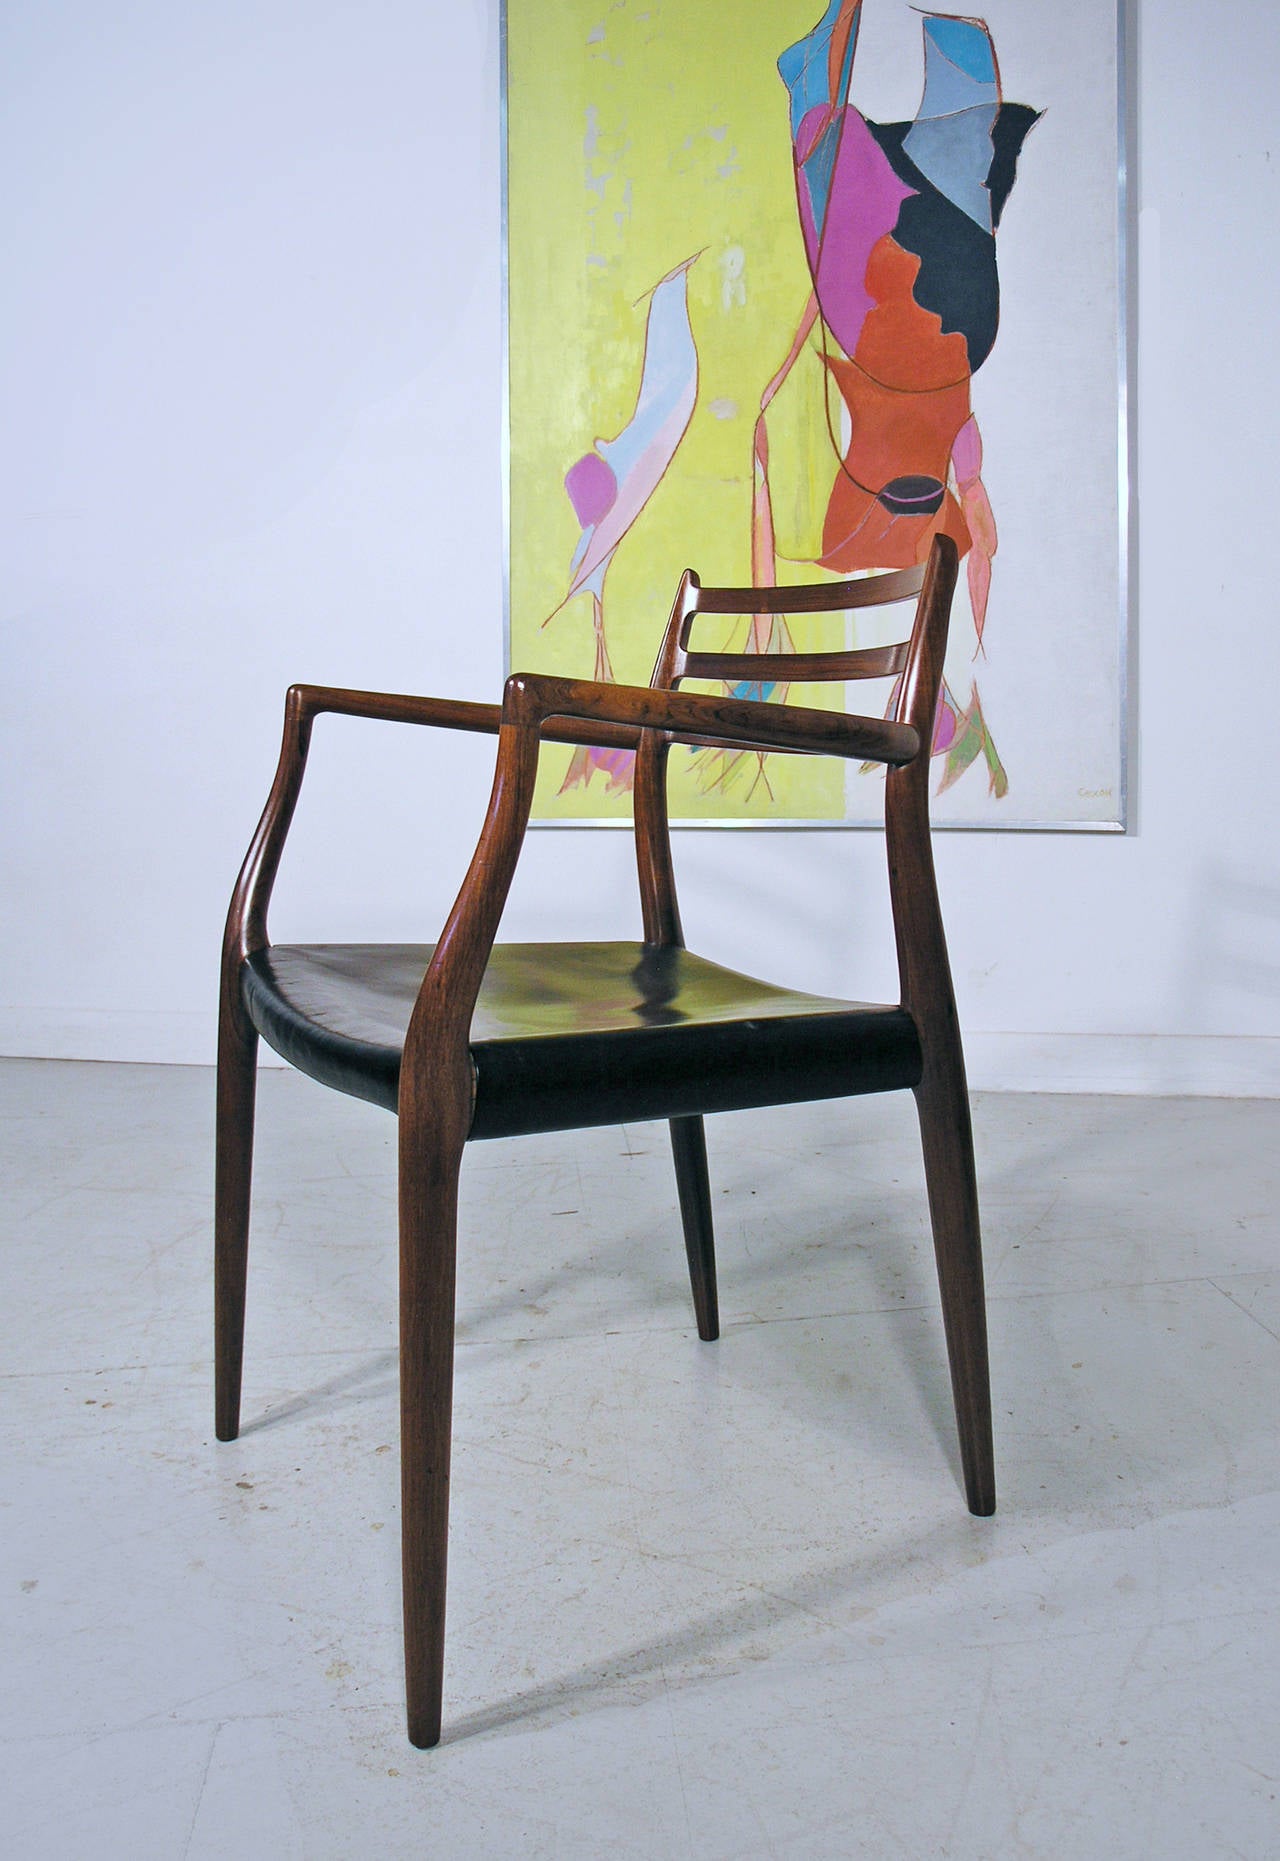 - Model 62 carver chair designed by Niels Moller 1962 for J. L. Moller, Denmark
- Excellent condition, with original black leather which shows some signs of wear.